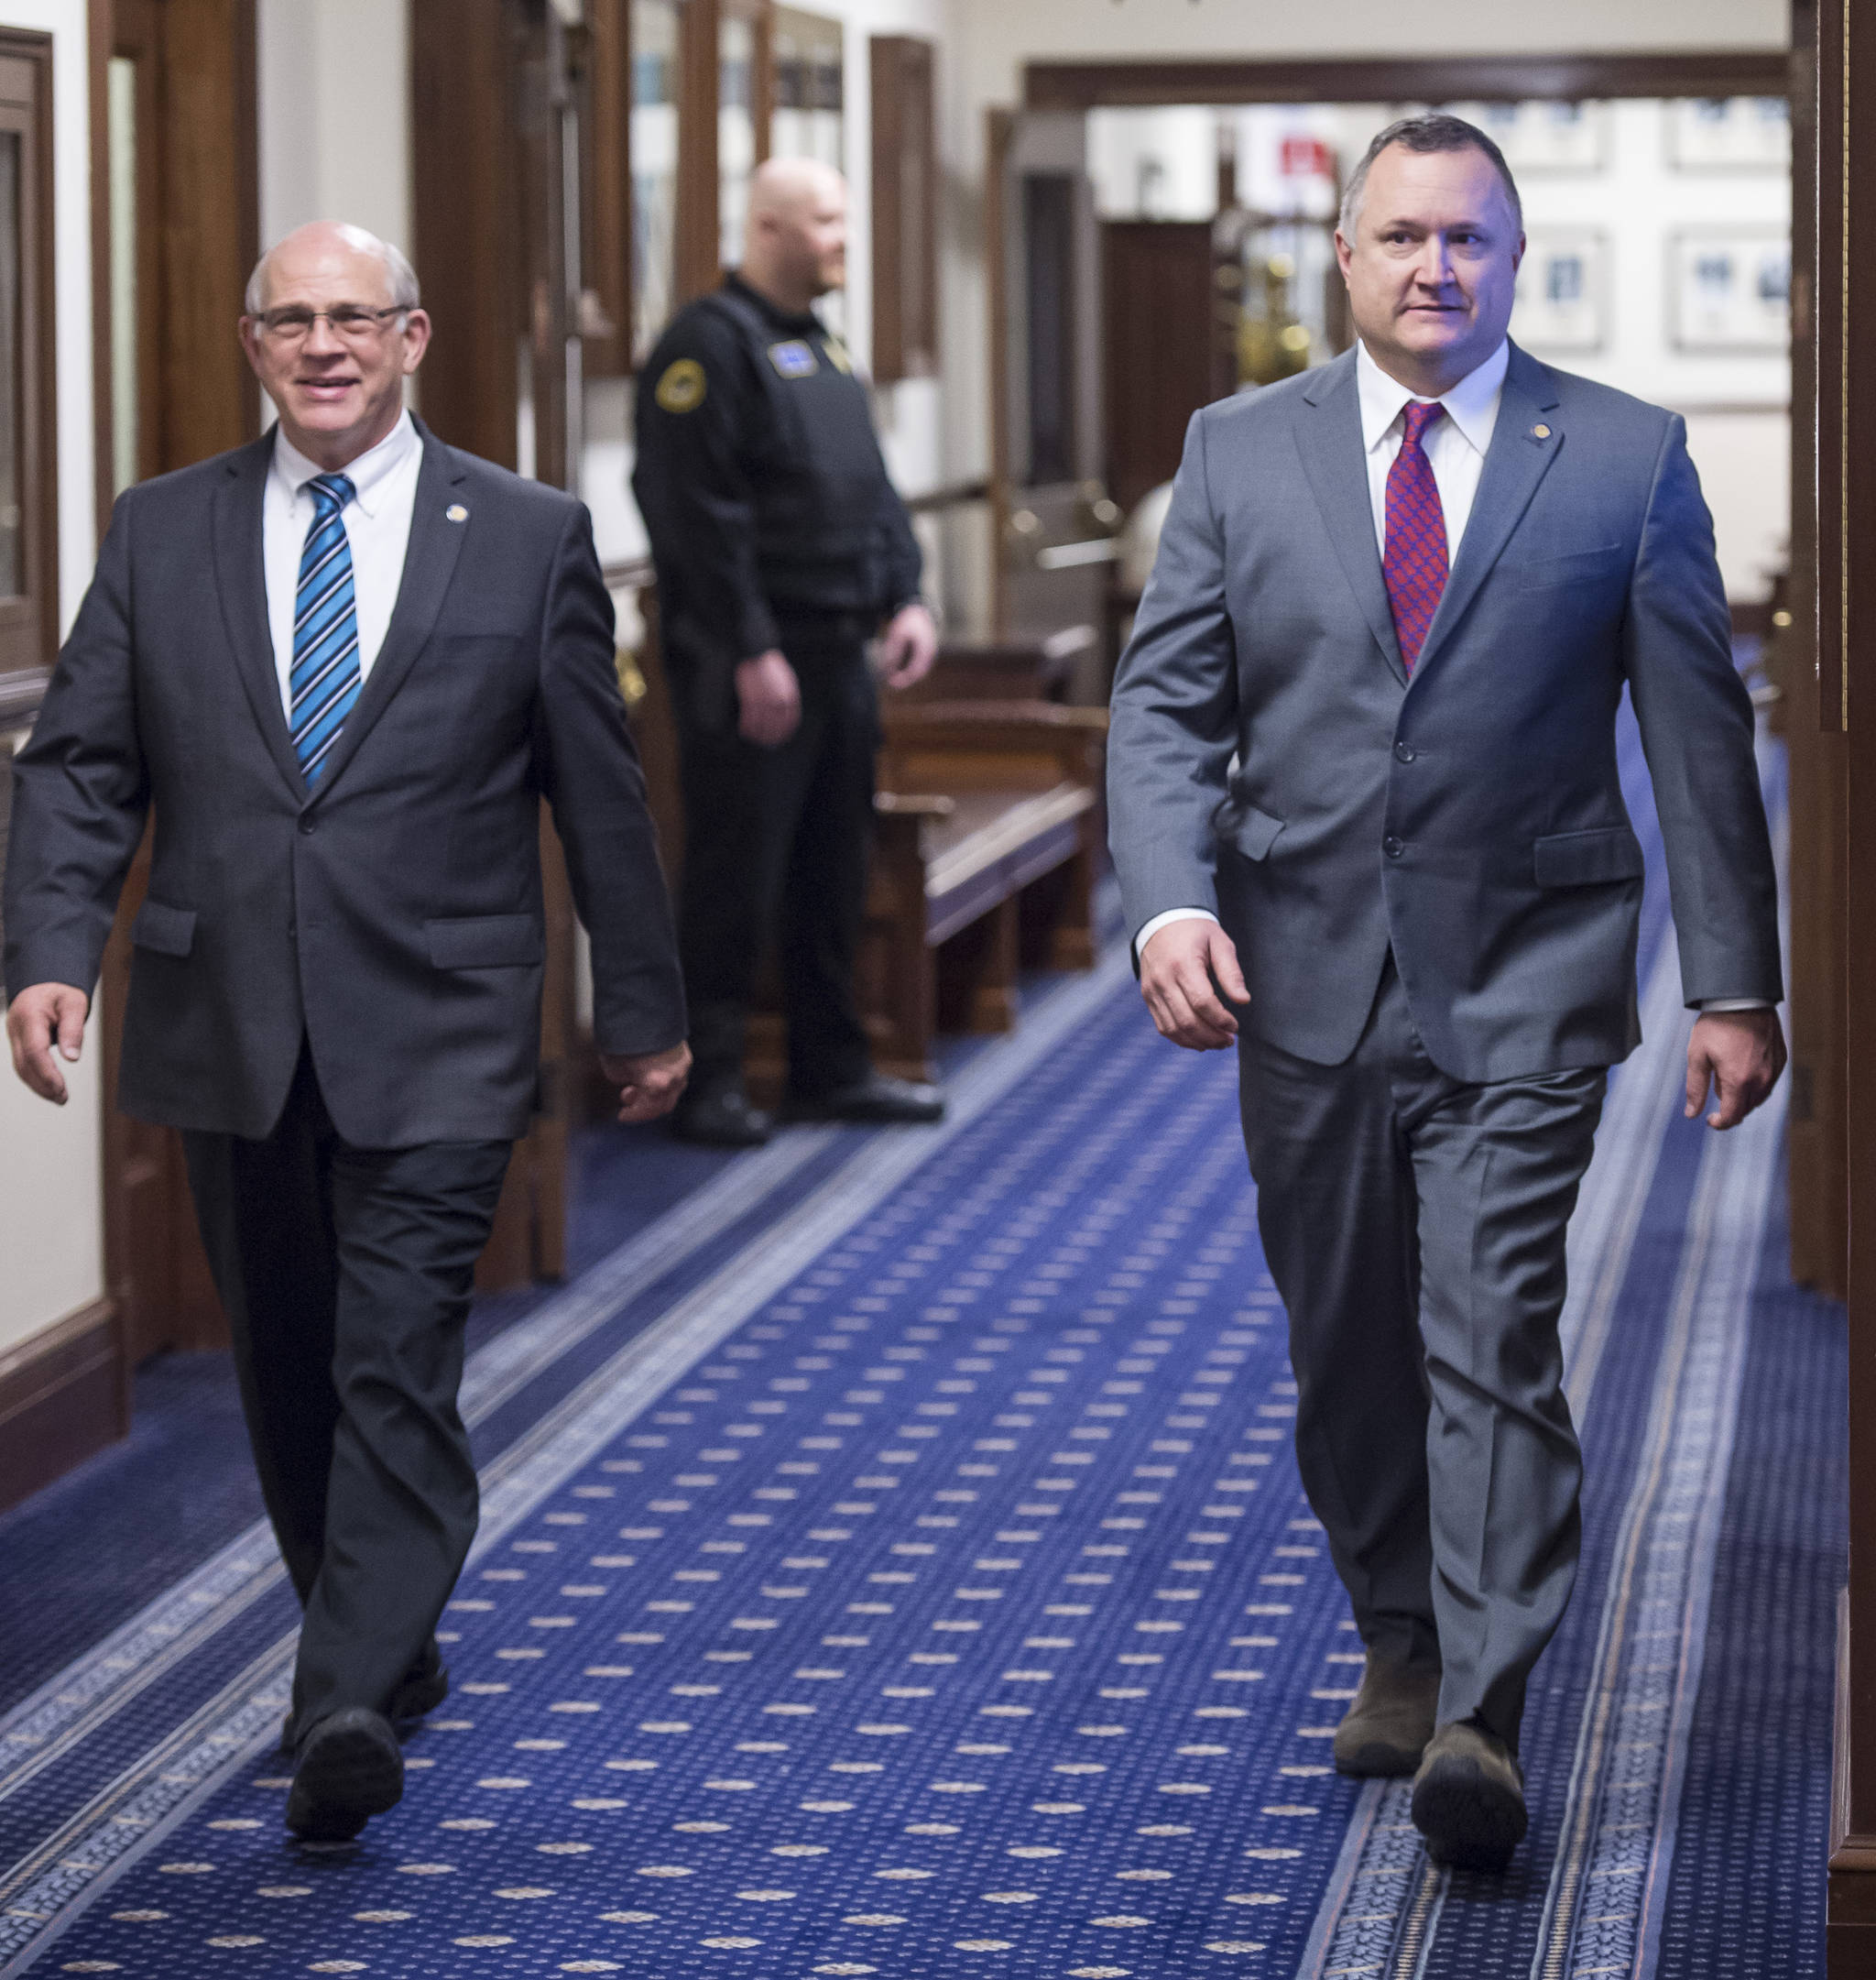 Sen. John Coghill, R-North Pole, left, and Sen. Mike Shower, R-Wasilla, power walk to attend Gov. Mike Dunleavy’s State of the State speech to a Joint Session of the Alaska Legislature on Tuesday, Jan. 22, 2019. (Michael Penn | Juneau Empire)